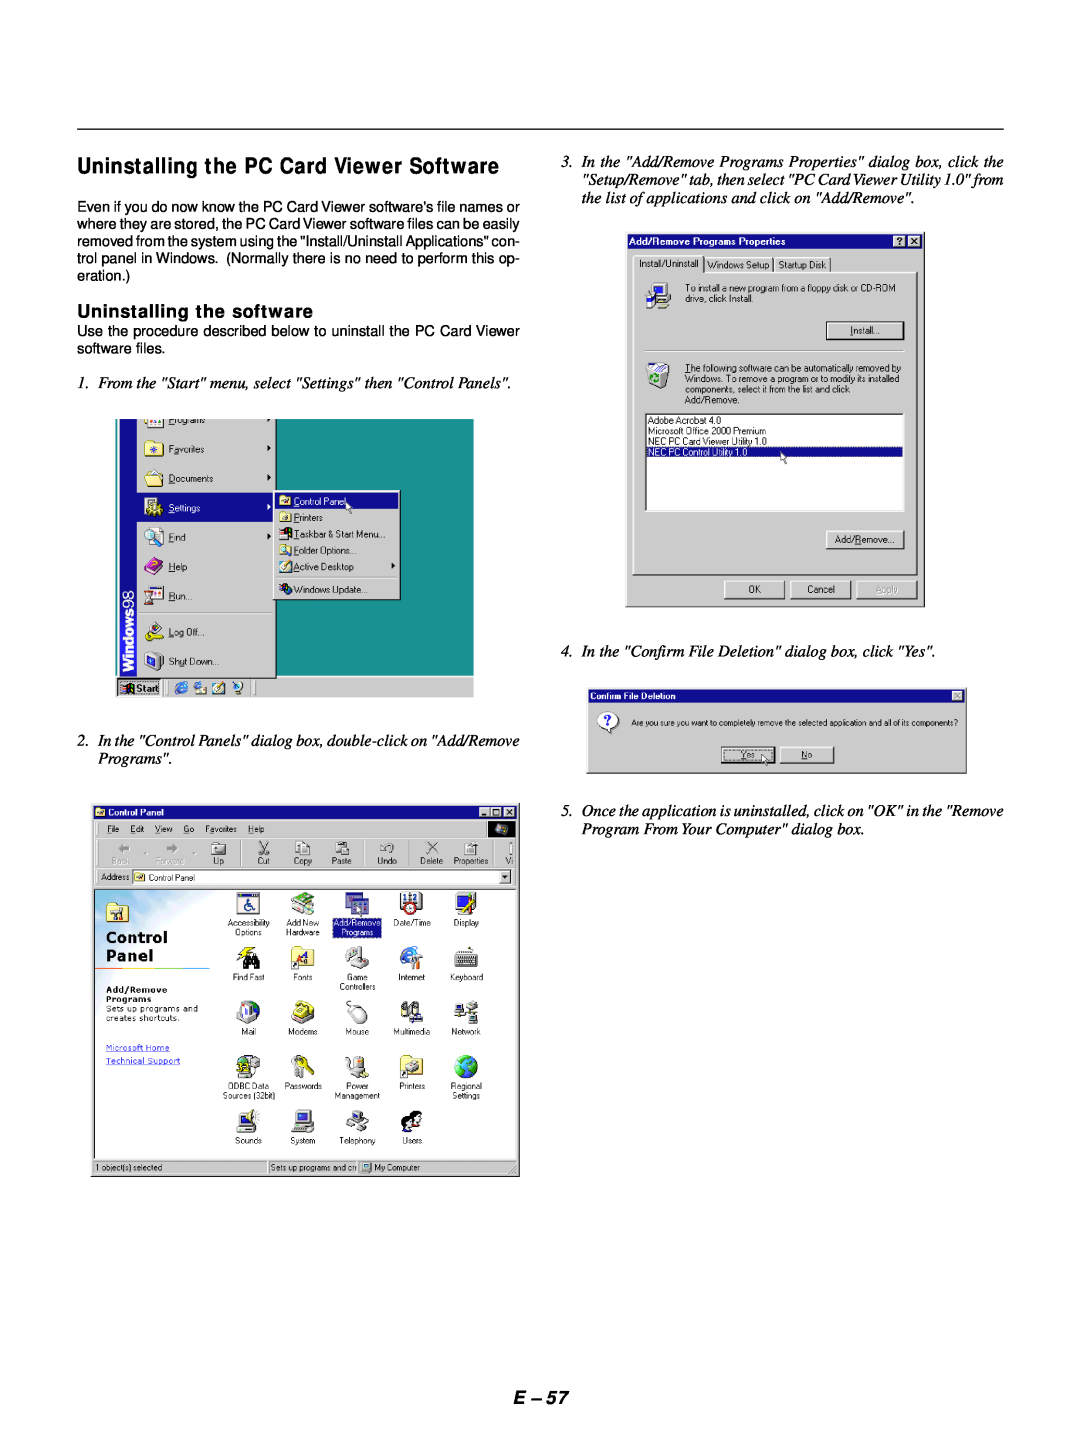 NEC GT1150 user manual Uninstalling the PC Card Viewer Software, Uninstalling the software 